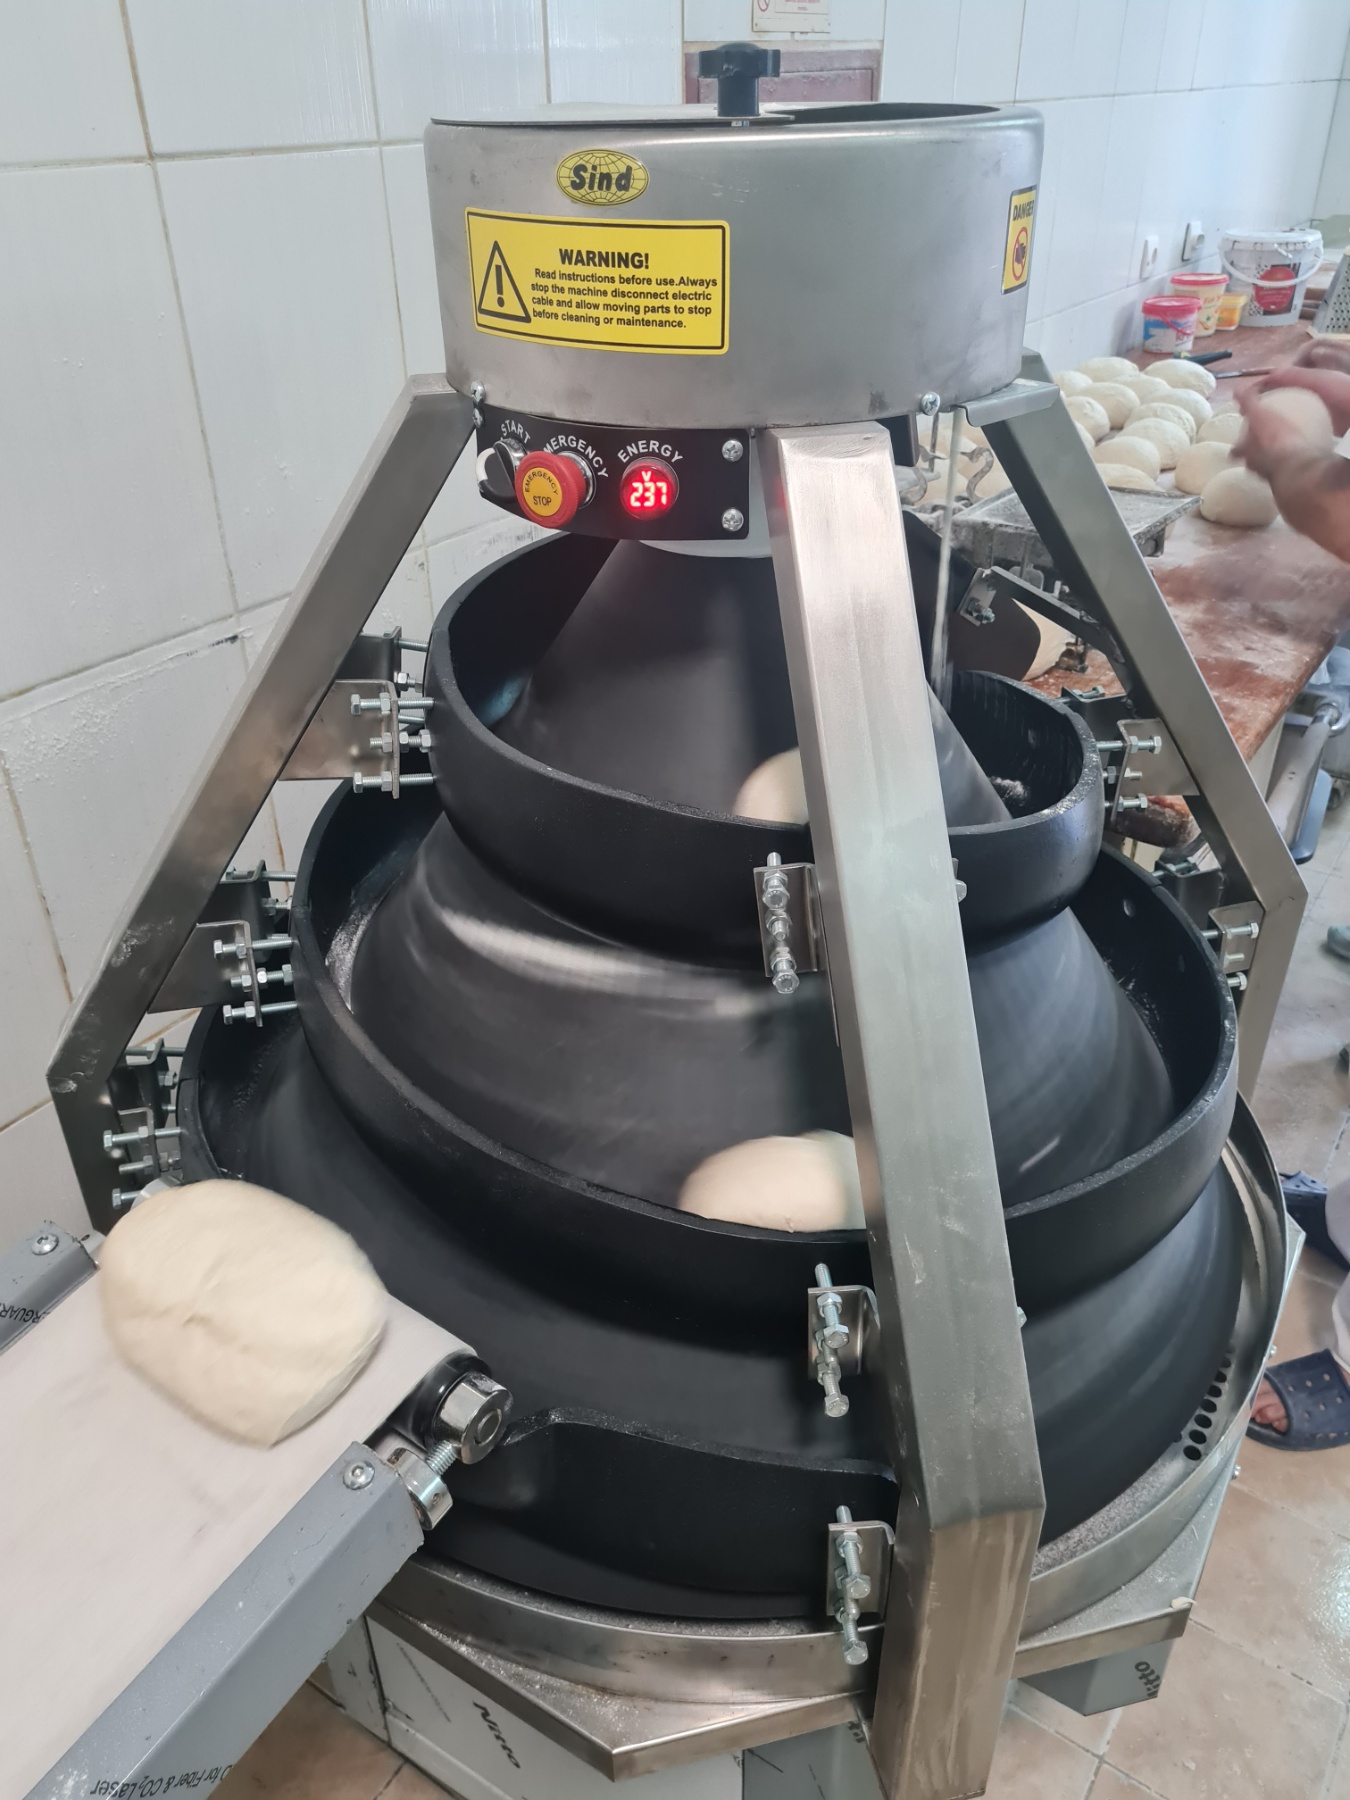 Commissioning of the dough divider and dough rounder SIND